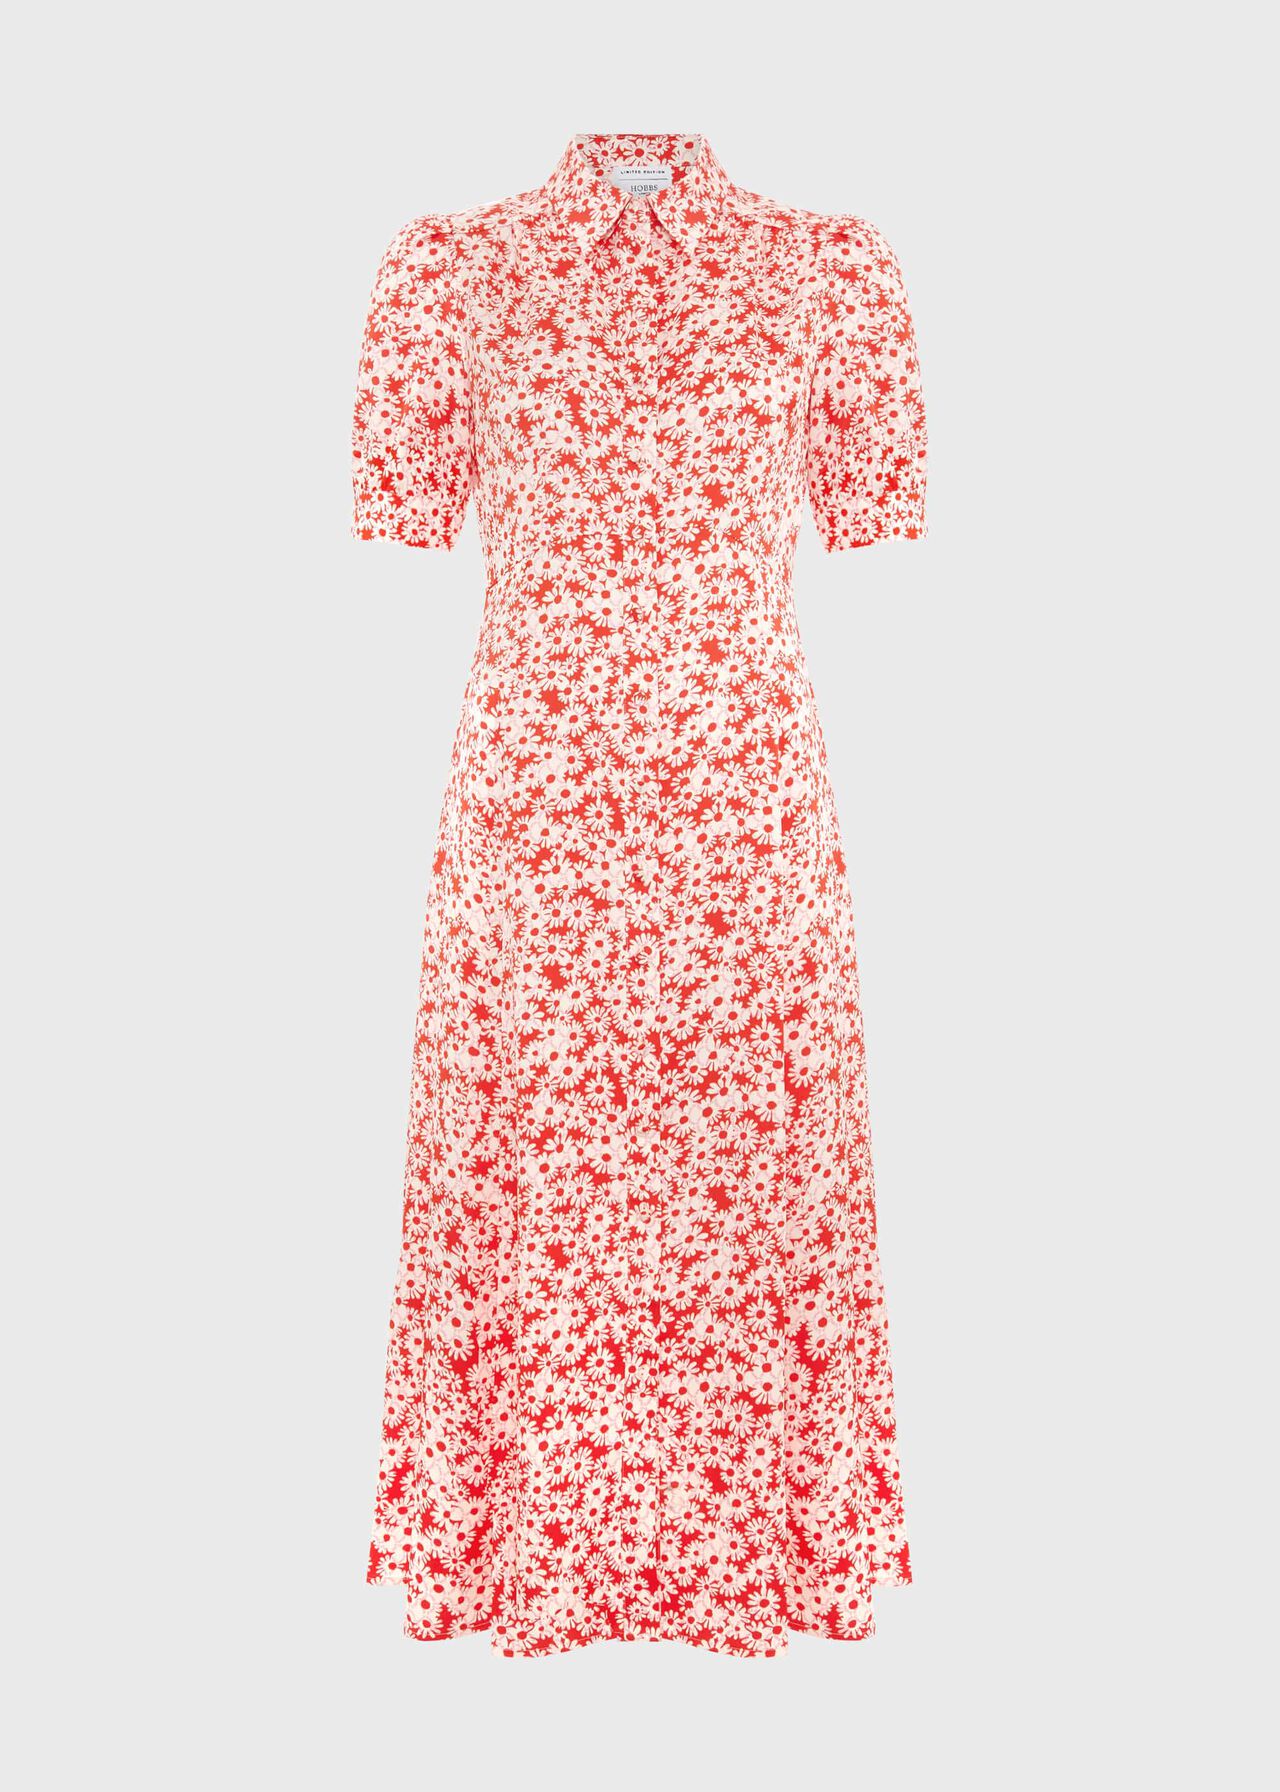 Chiswell Paris Shirt Dress, Red Ivory, hi-res